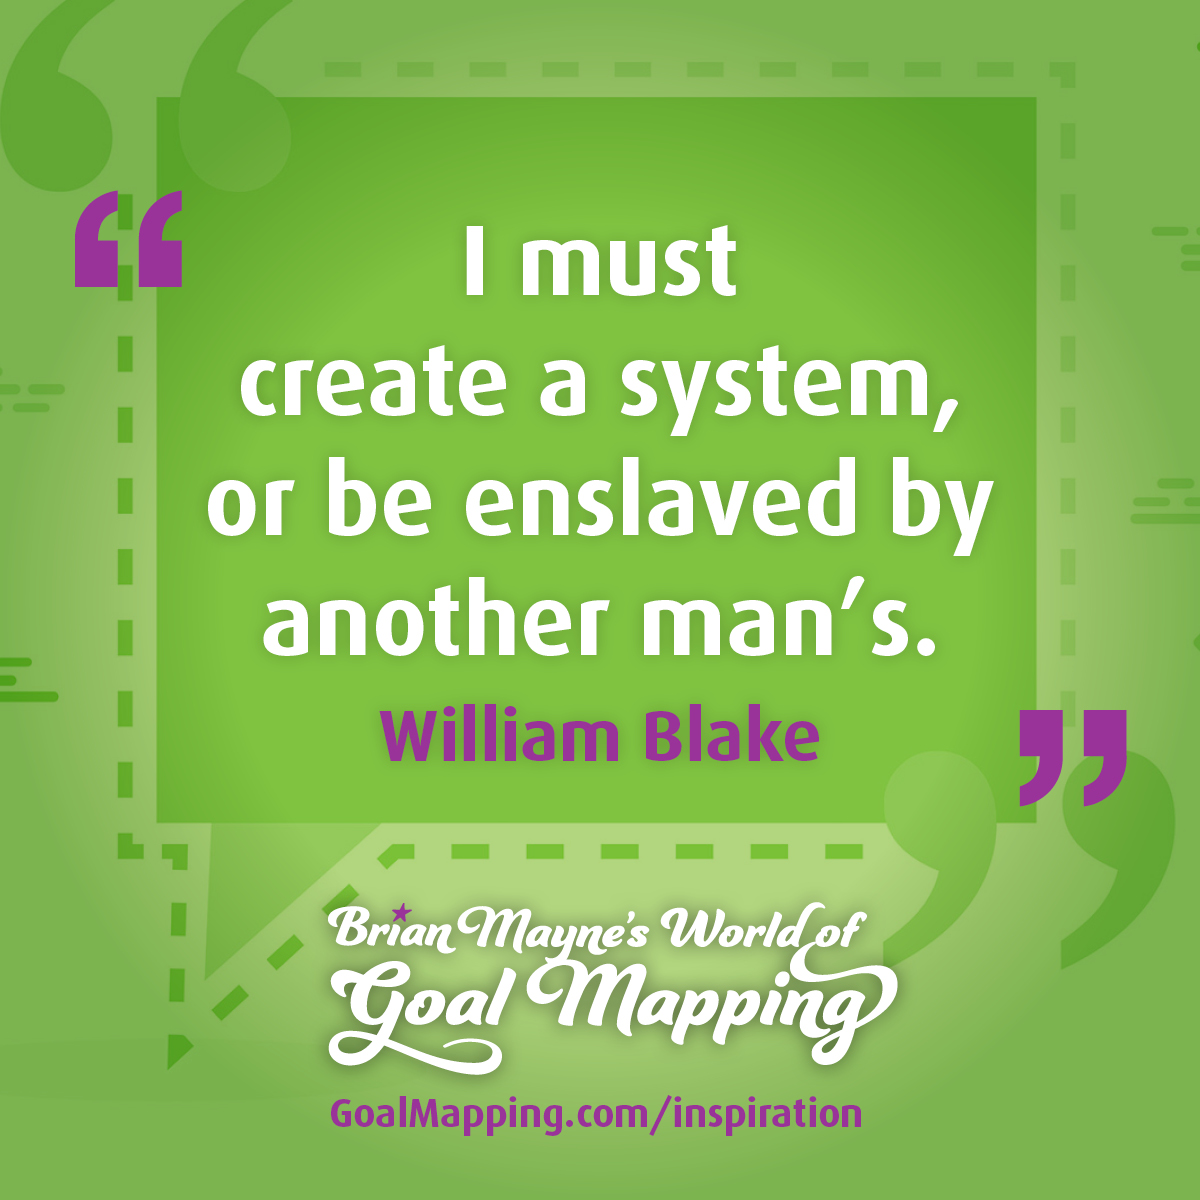 "I must create a system, or be enslaved by another man’s William Blake